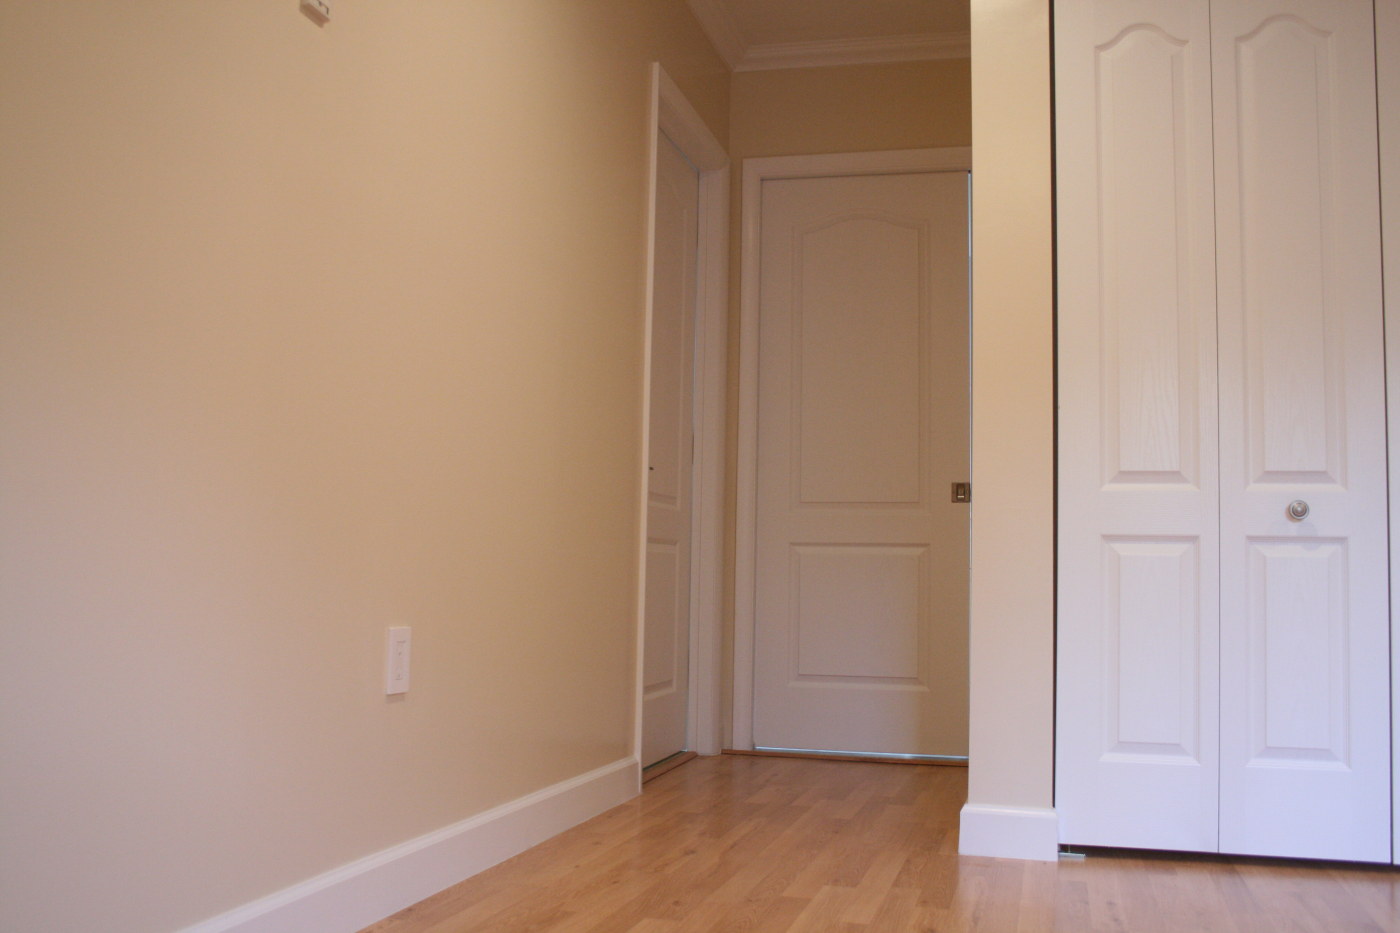 After photo of bedroom entrance